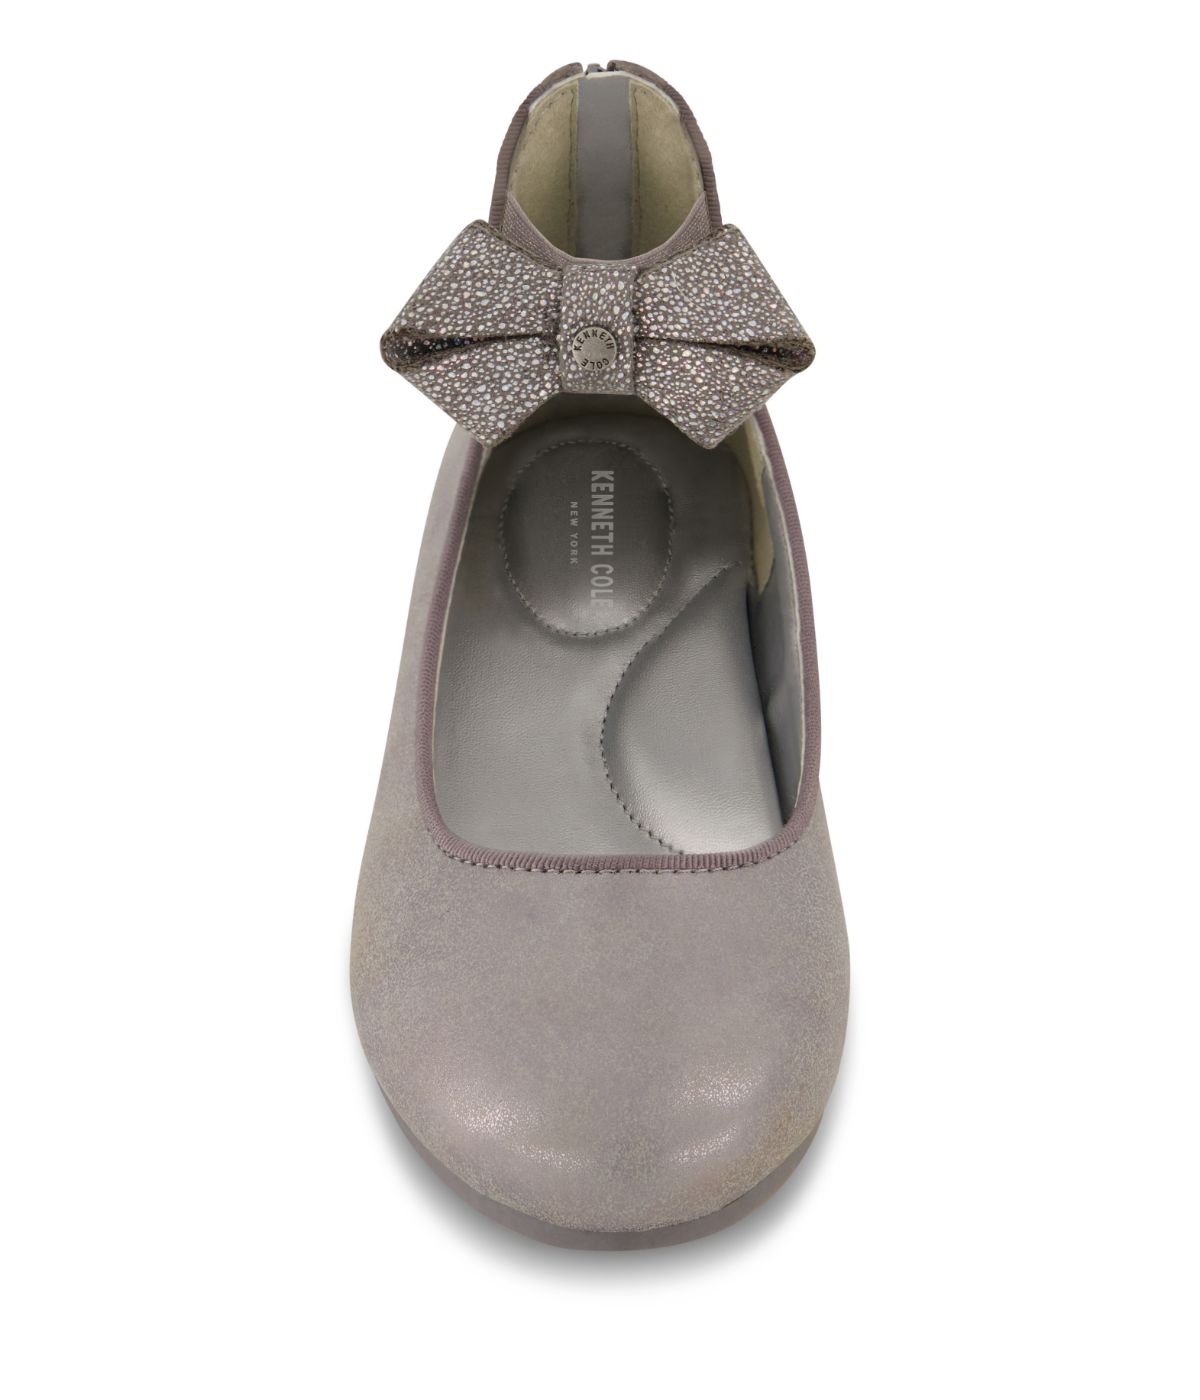 Daisy Lily Ballet Flat Pewter